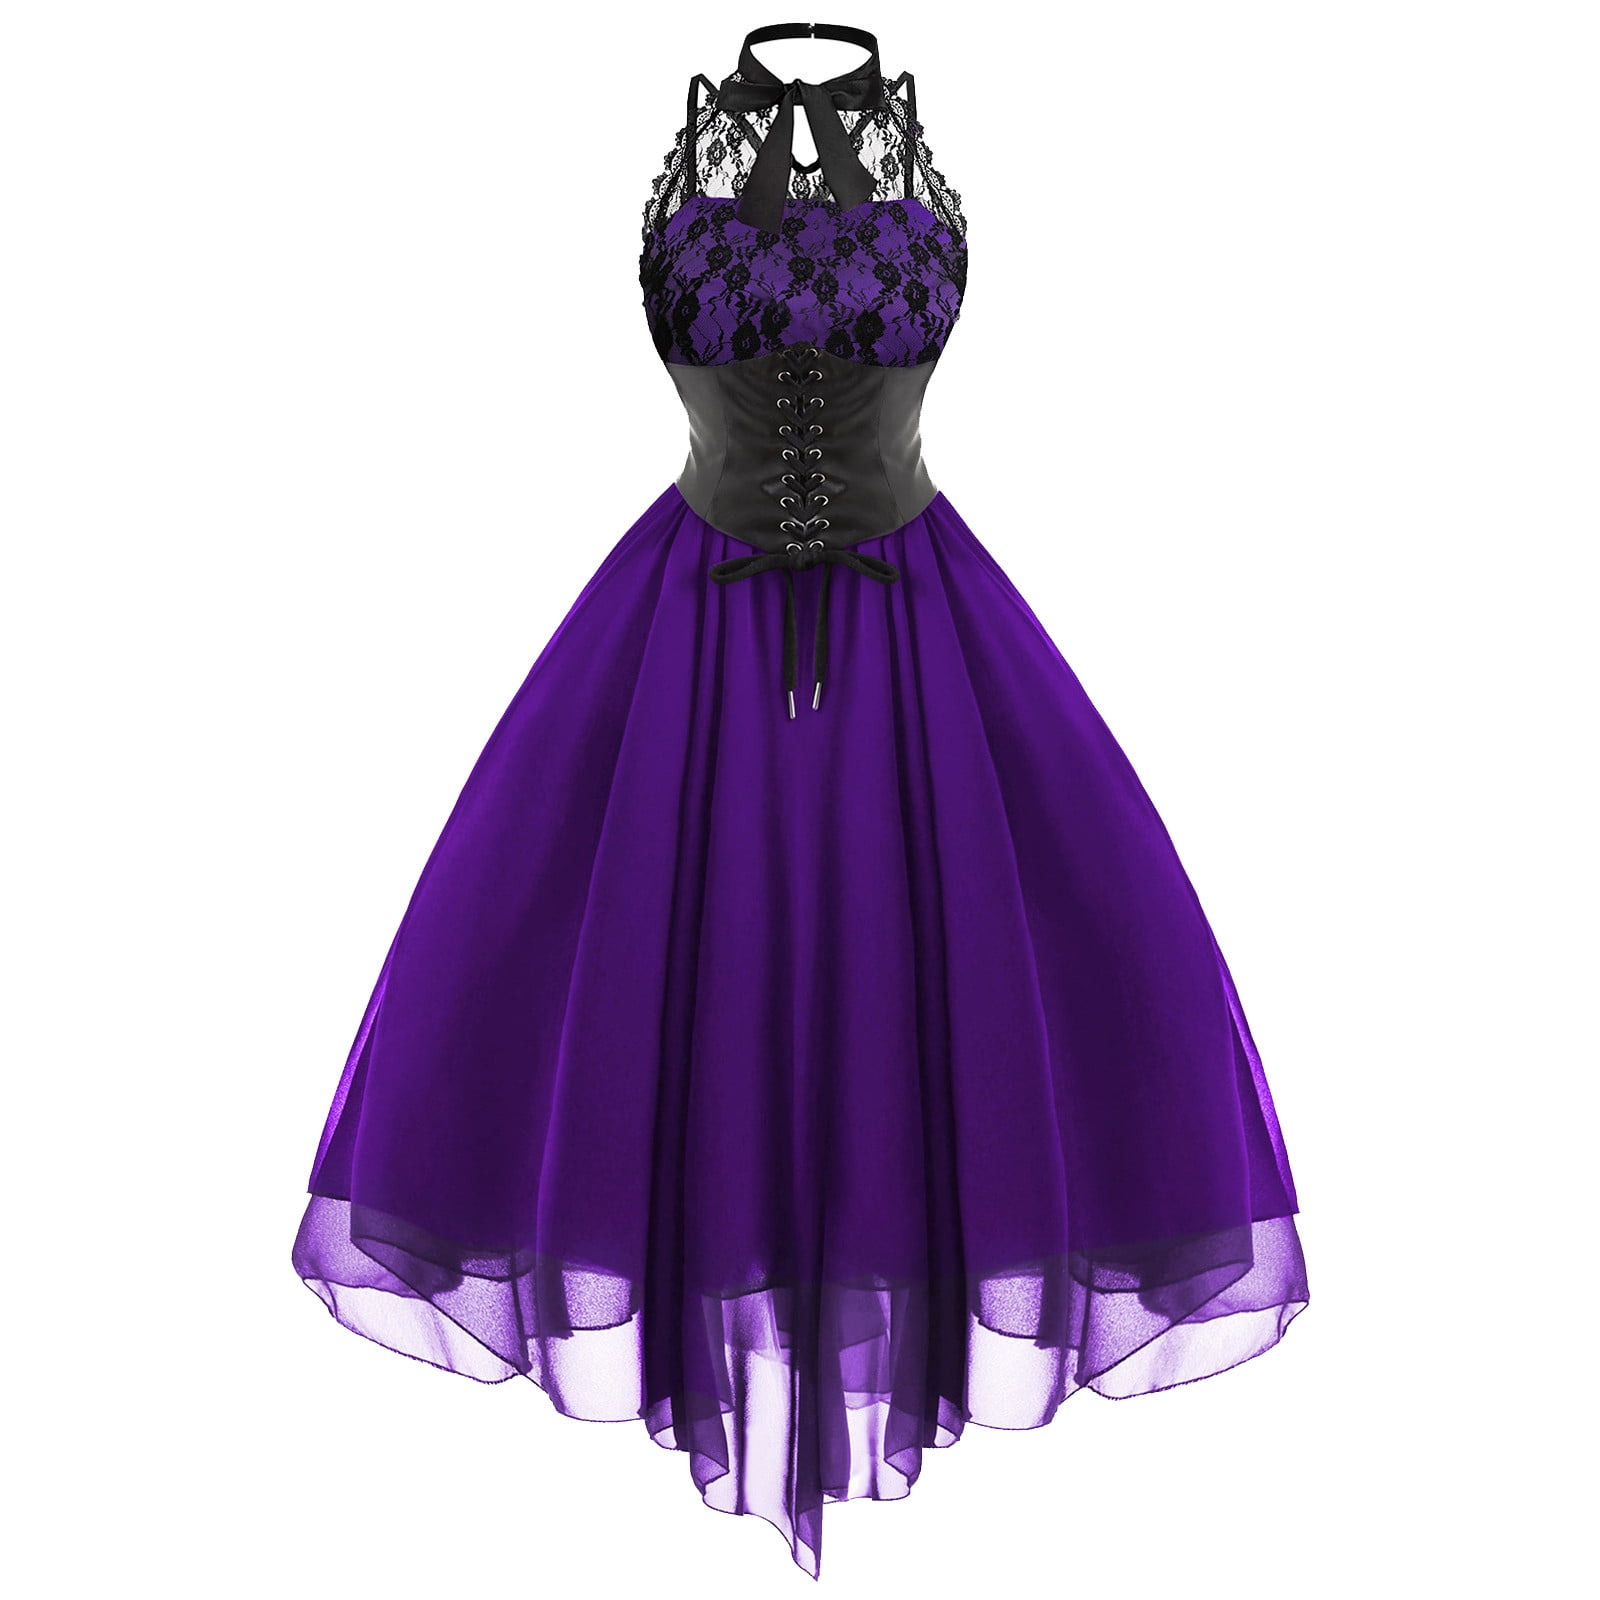 YWDJ 80s Prom Dress for Women Fashion Gothic Style Banquet